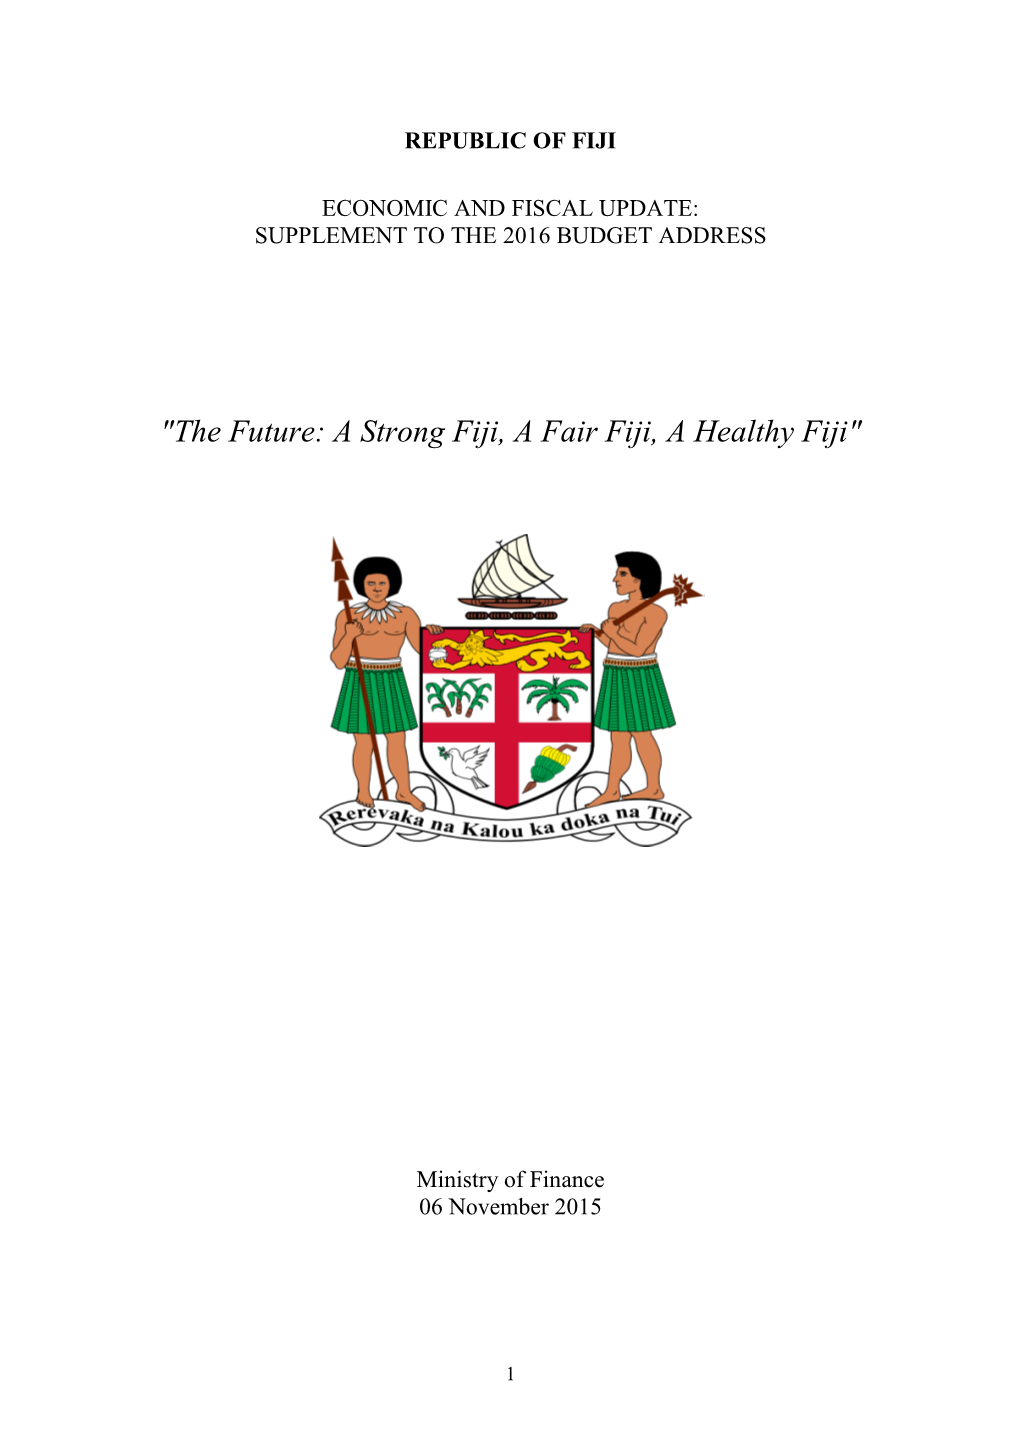 Supplement to the 2016 Budget Address